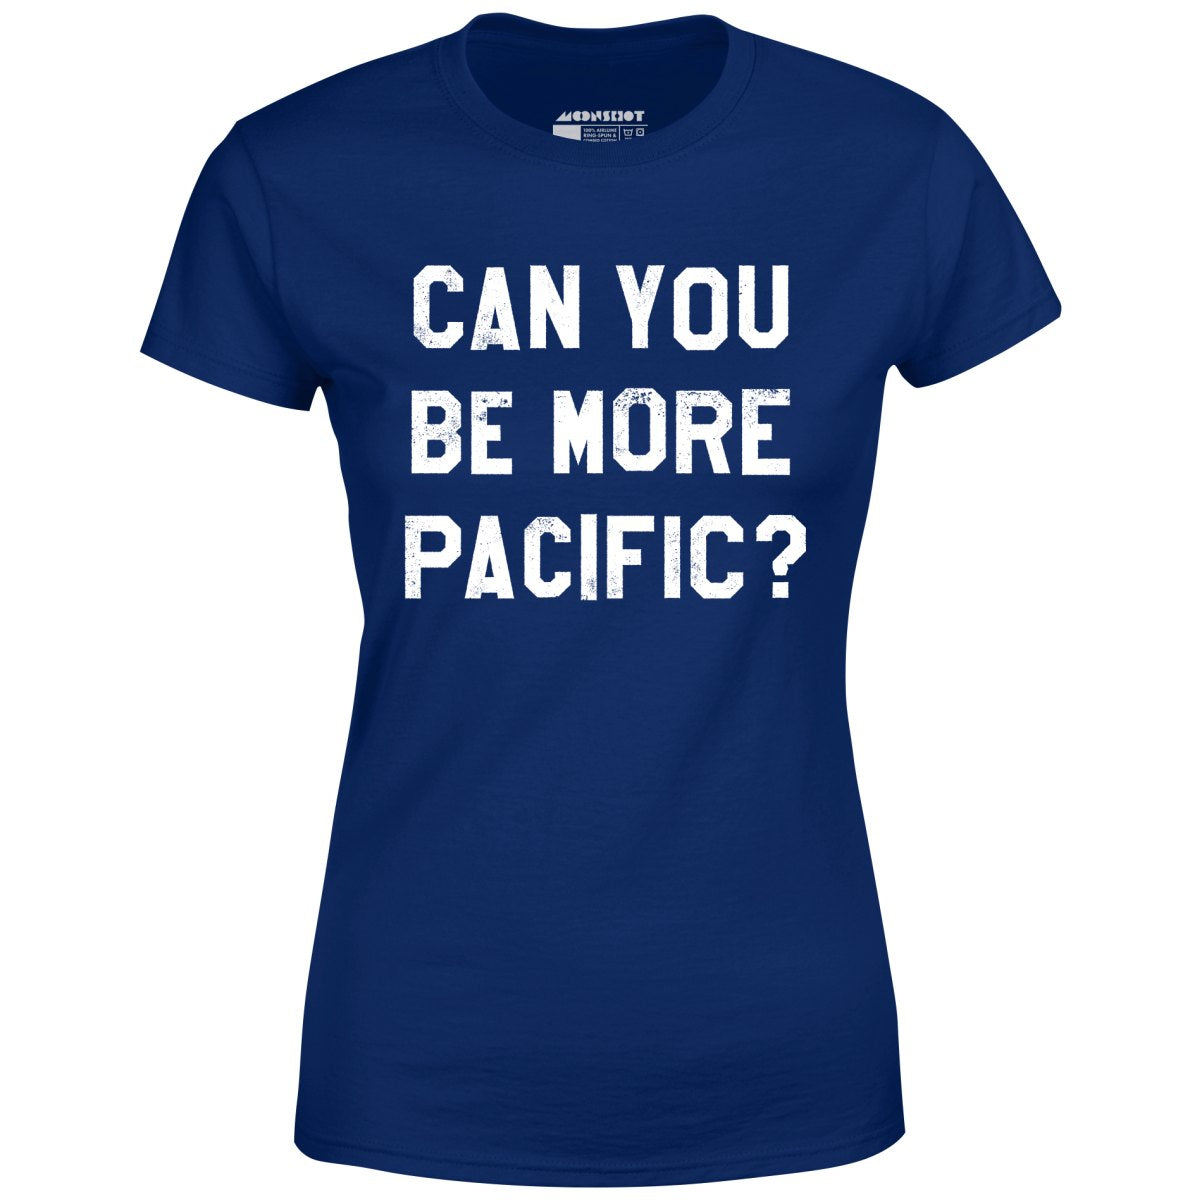 Can You Be More Pacific? - Women's T-Shirt